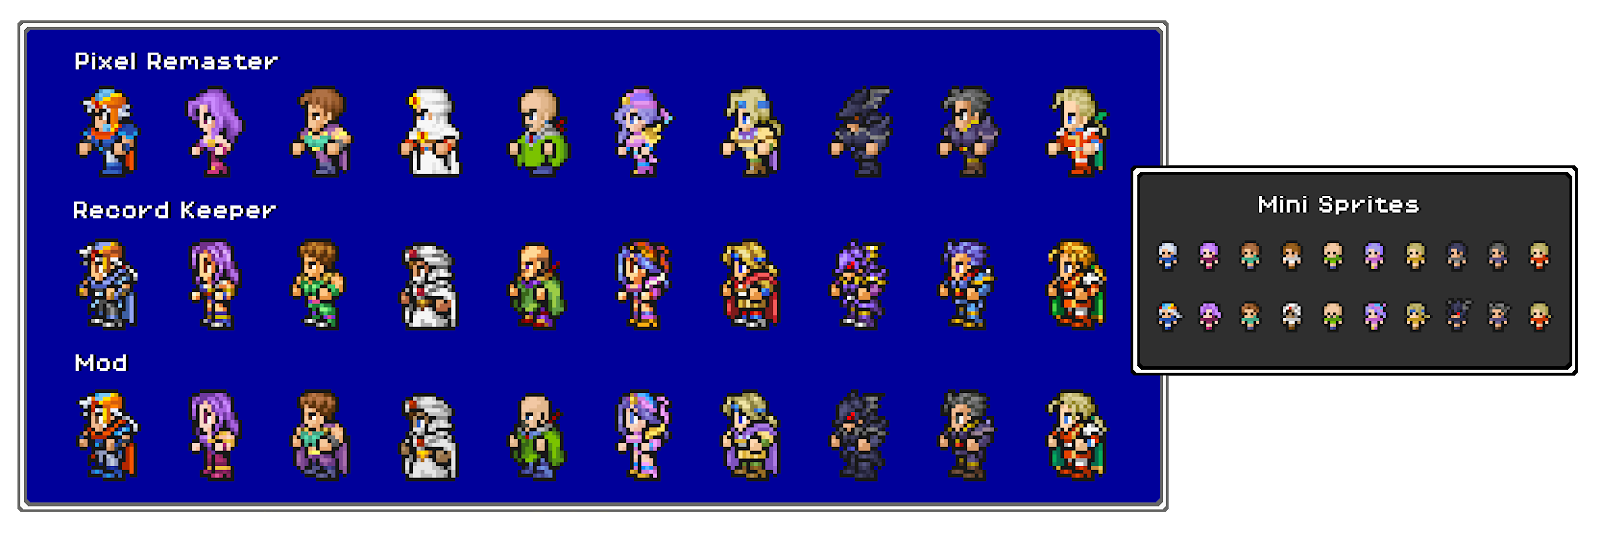 FINAL FANTASY II - Complete Modding Guide and Index - Player & NPC Sprite Mods - 7DC22F0